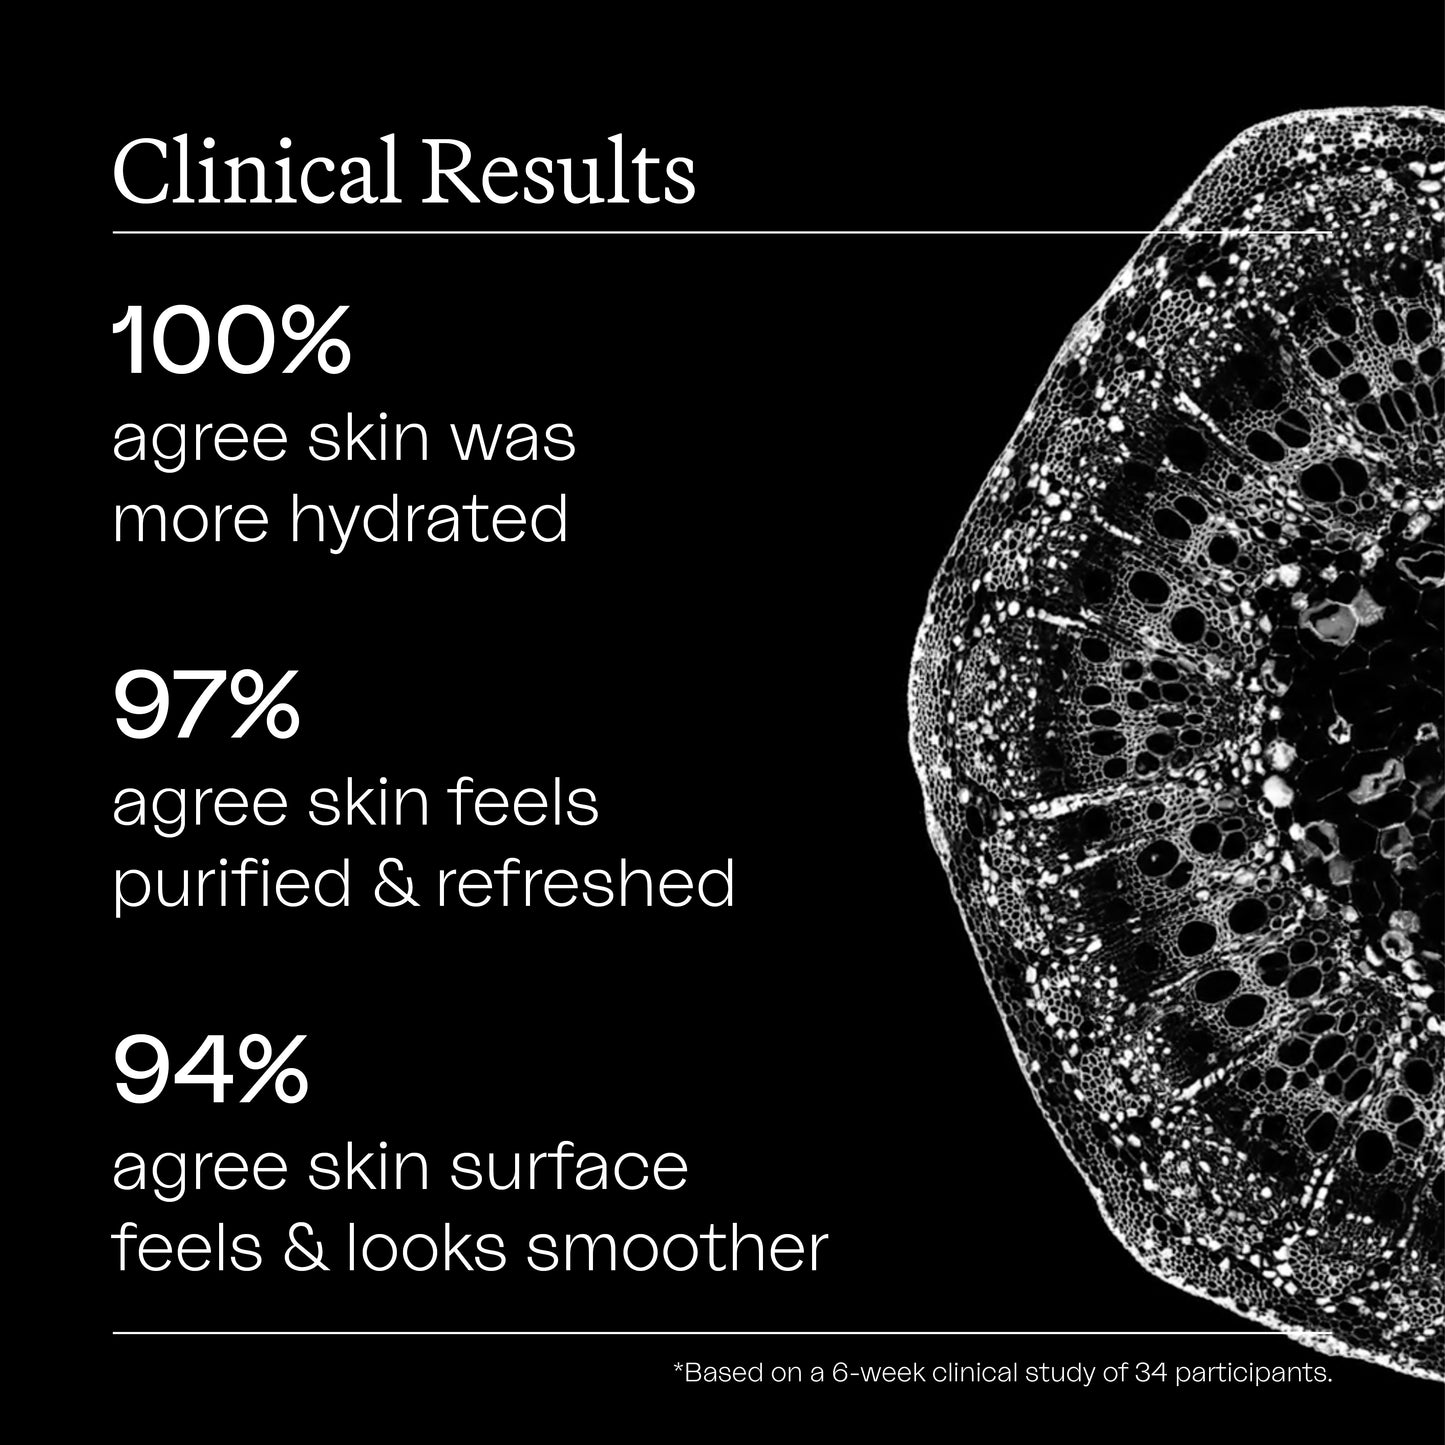 Eighth Day Skin The Resurfacing Tonic Clinical Results: 100% agree skin was more hydrated. 97% agree skin feels purified and refreshed. 94% agree skin surface feels and looks smoother.